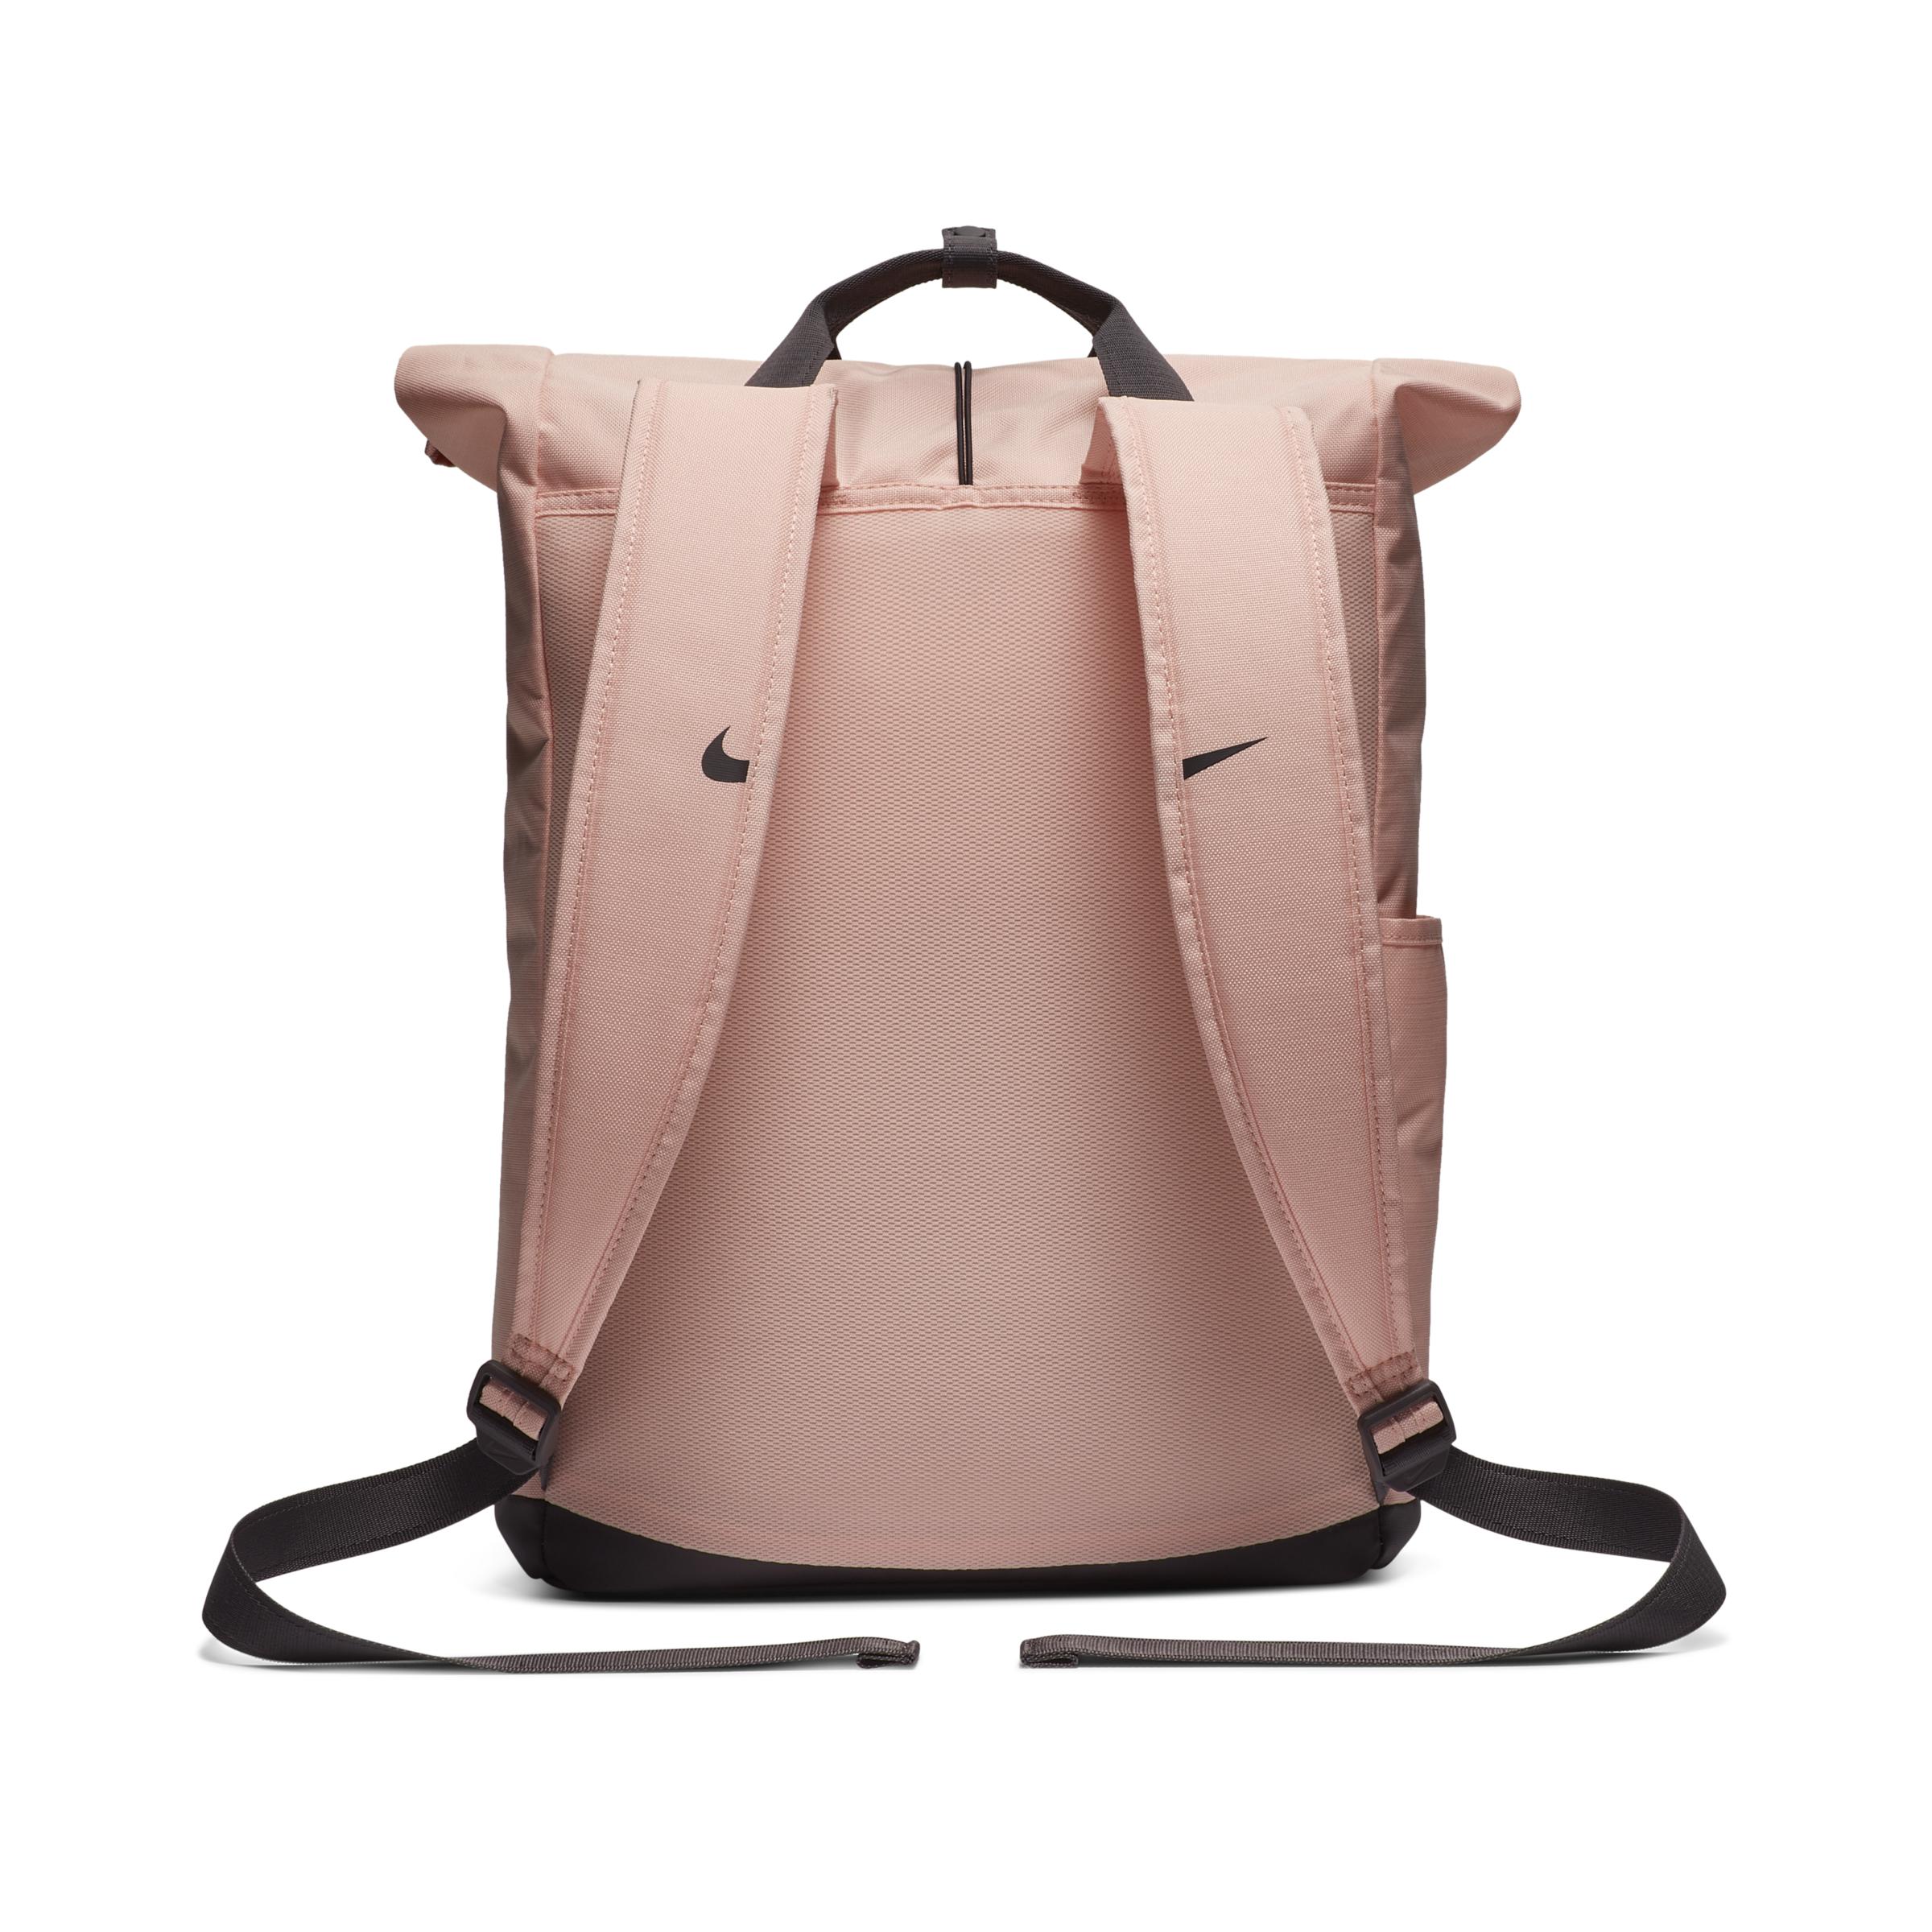 let's do it Enhance highlight nike radiate rucksack rosa picture Accessible  Danish